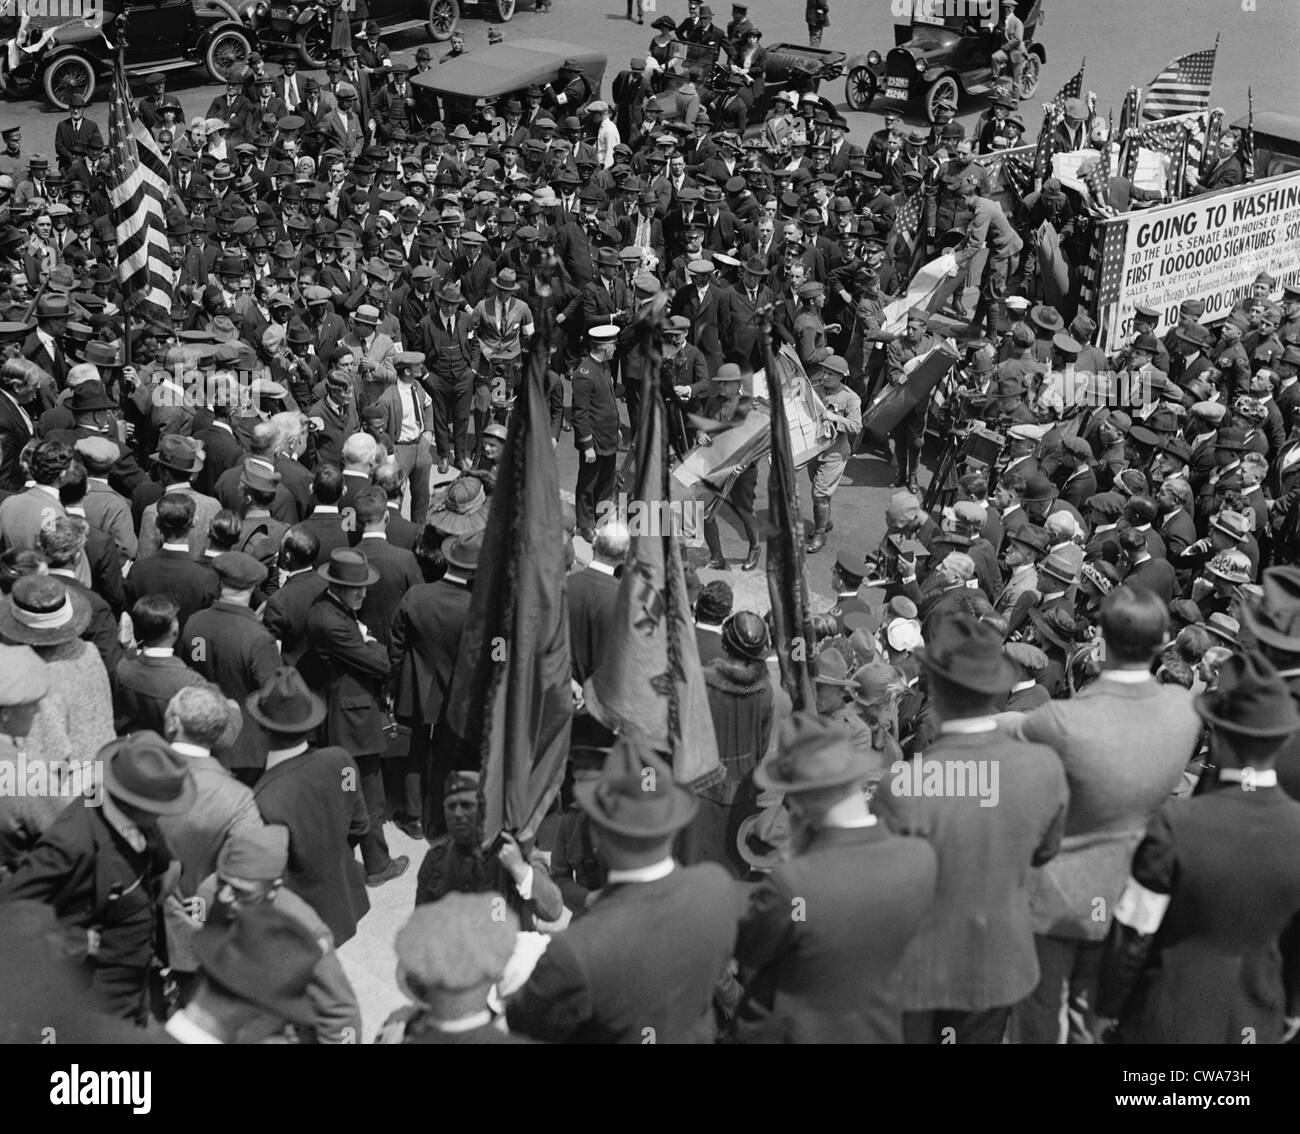 The Bonus March. 1922 demonstration by World War I veterans for government bonuses. In 1924 Congress voted to provide veterans Stock Photo